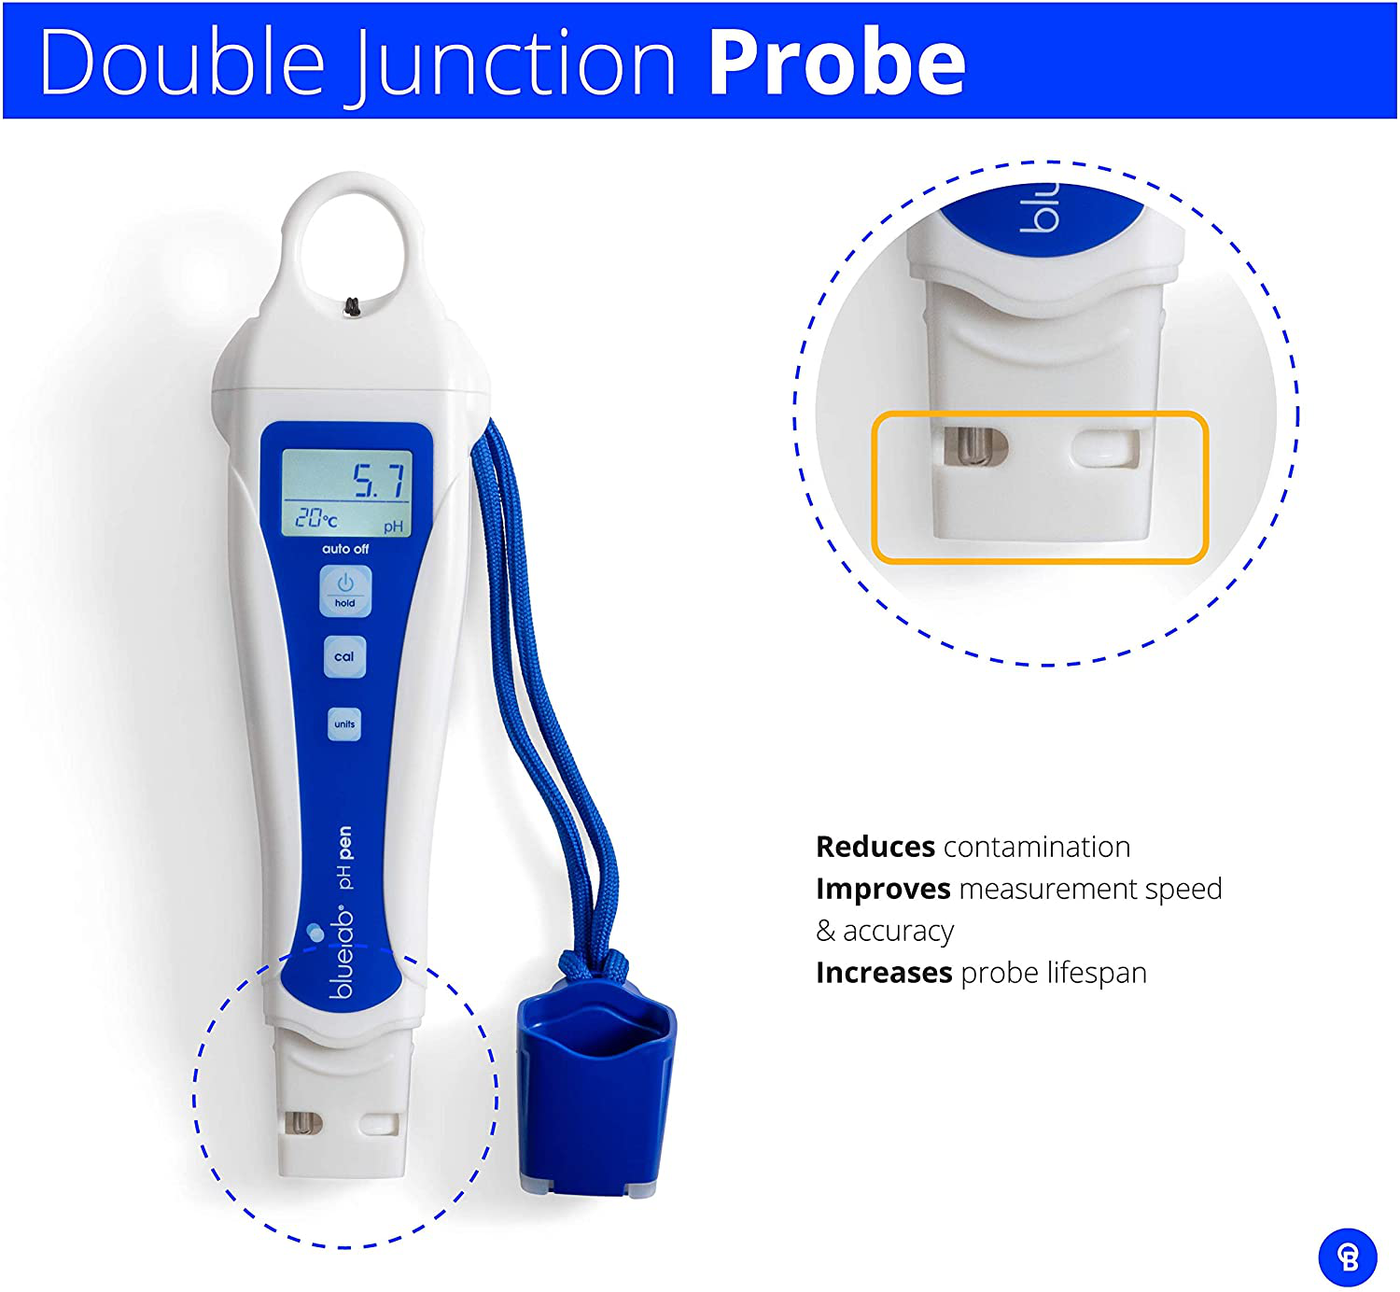 Bluelab PENPH pH Pen, Digital Meter Kit for Water Test with Easy Two Point Calibration and Double Junction Probe for Hydroponic System and Indoor Plant Grow, White